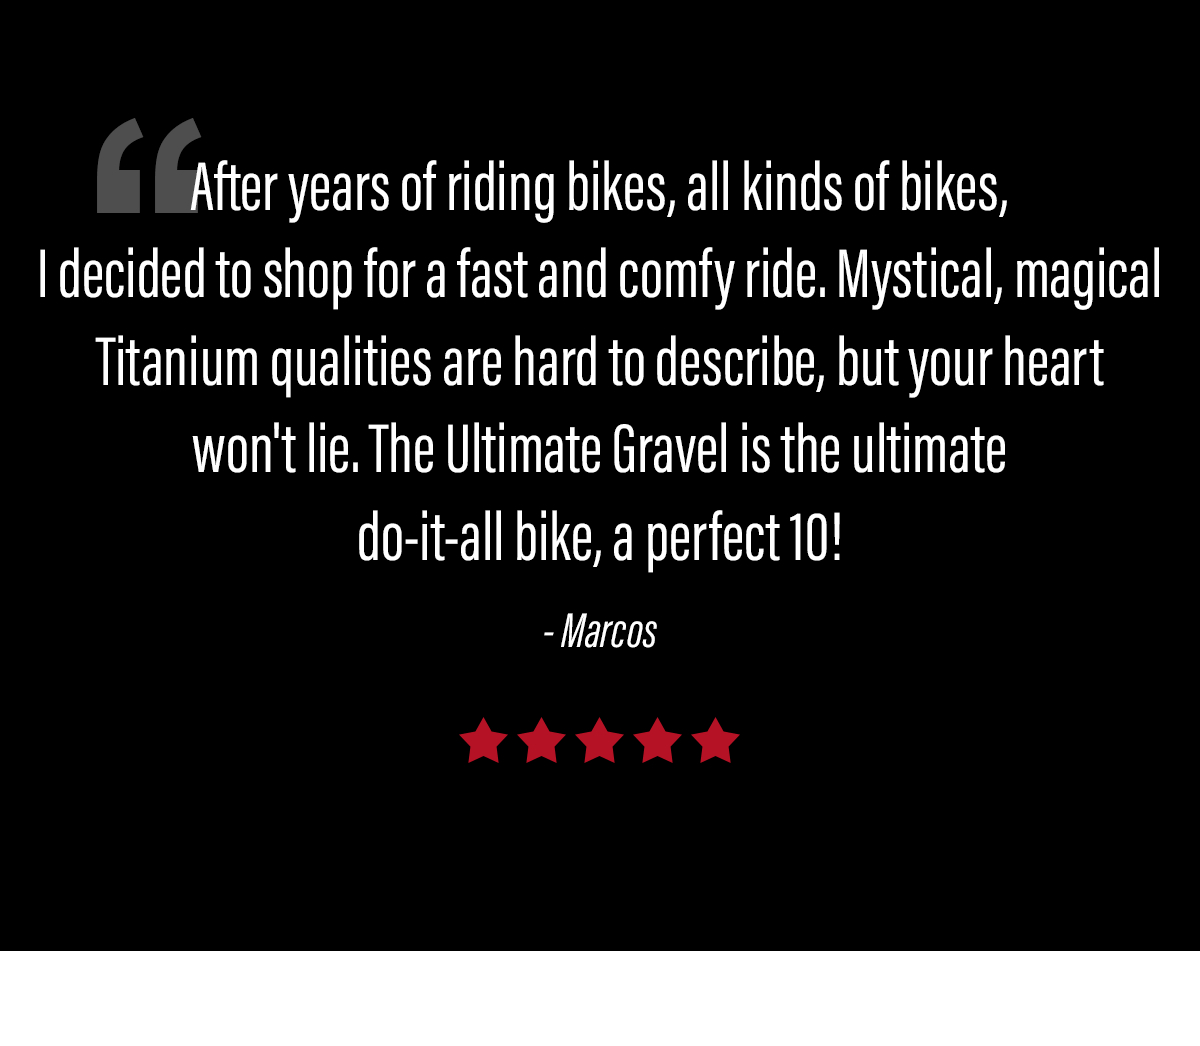 "After years of riding bikes, I decided to shop for a fast and comfy ride. Mystical, magical Titanium qualities are hard to describe, but your heart won''t lie."